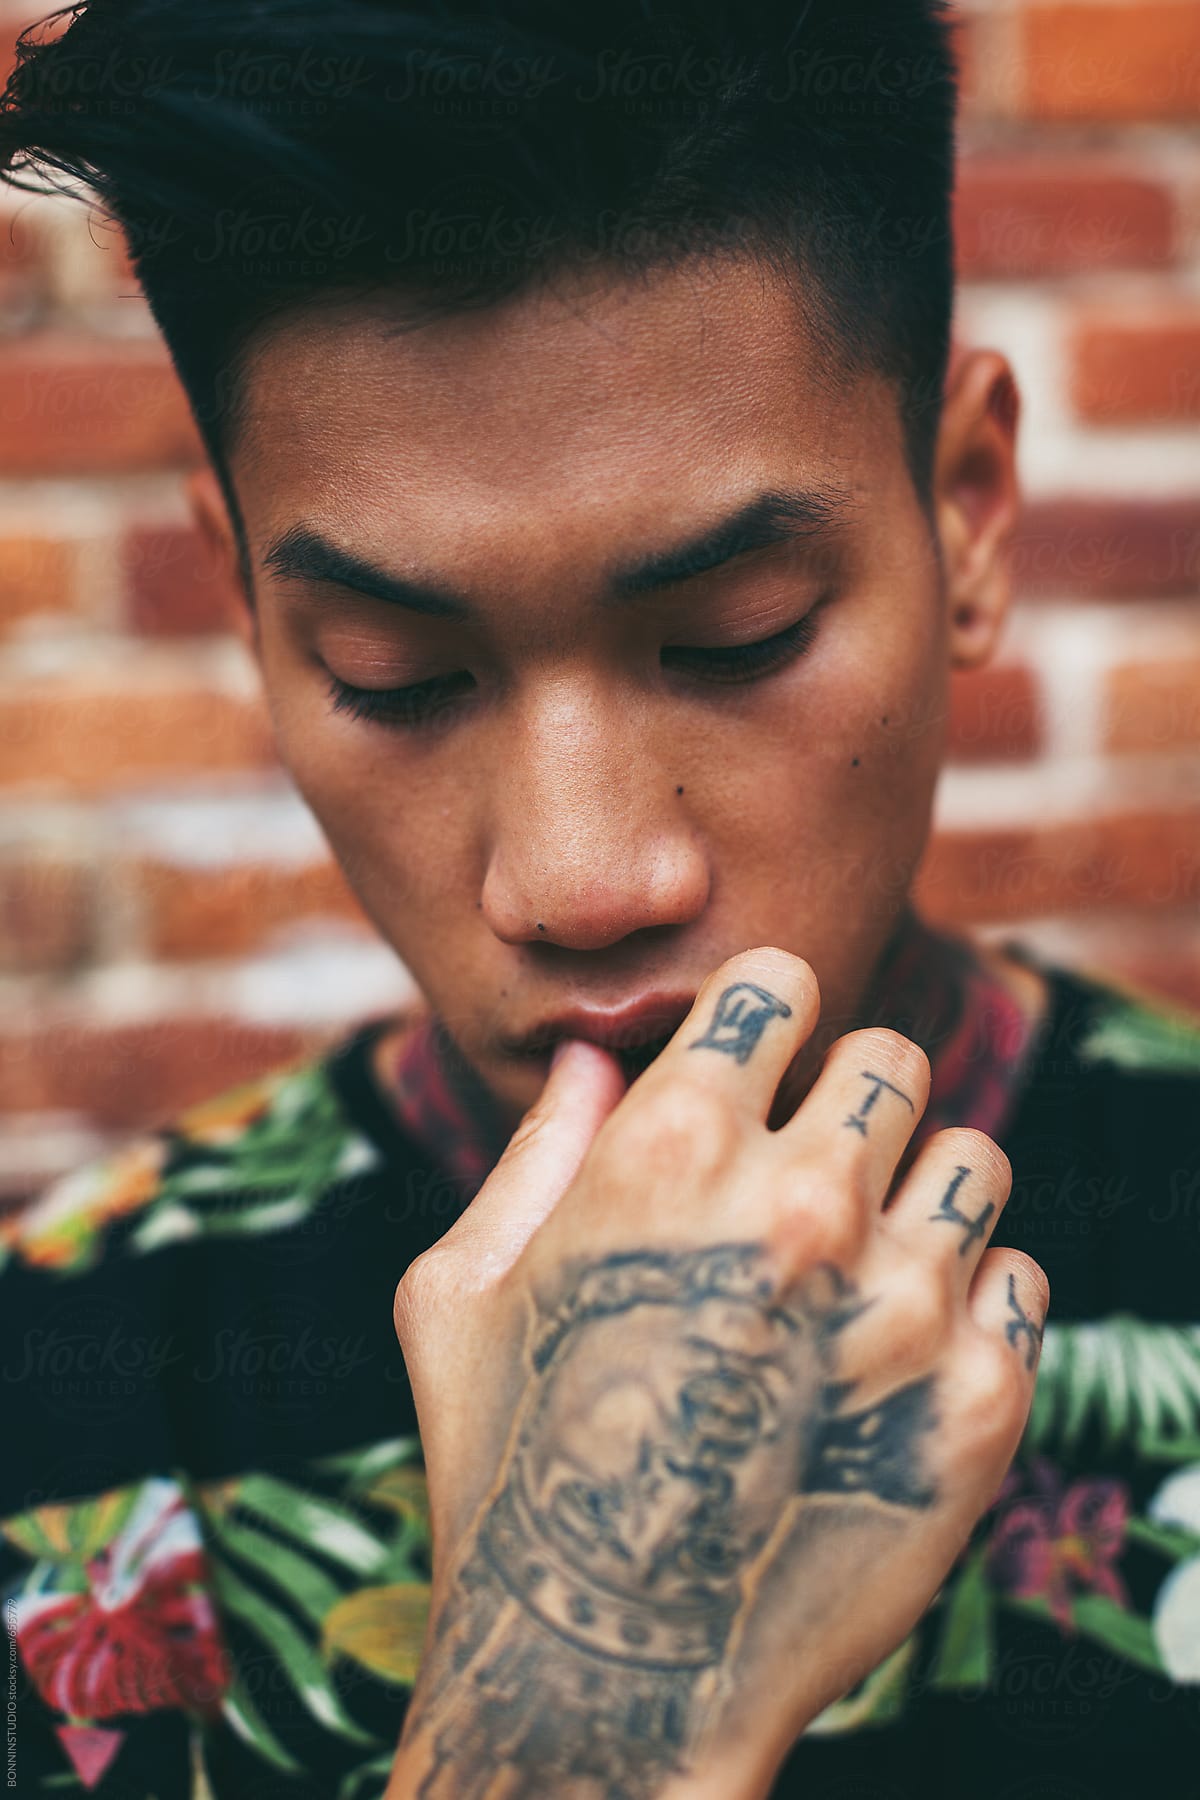 Closeup Portrait Of A Young Asian Man With Tattooed Hand Standing Outside." by Stocksy Contributor "BONNINSTUDIO " - Stocksy